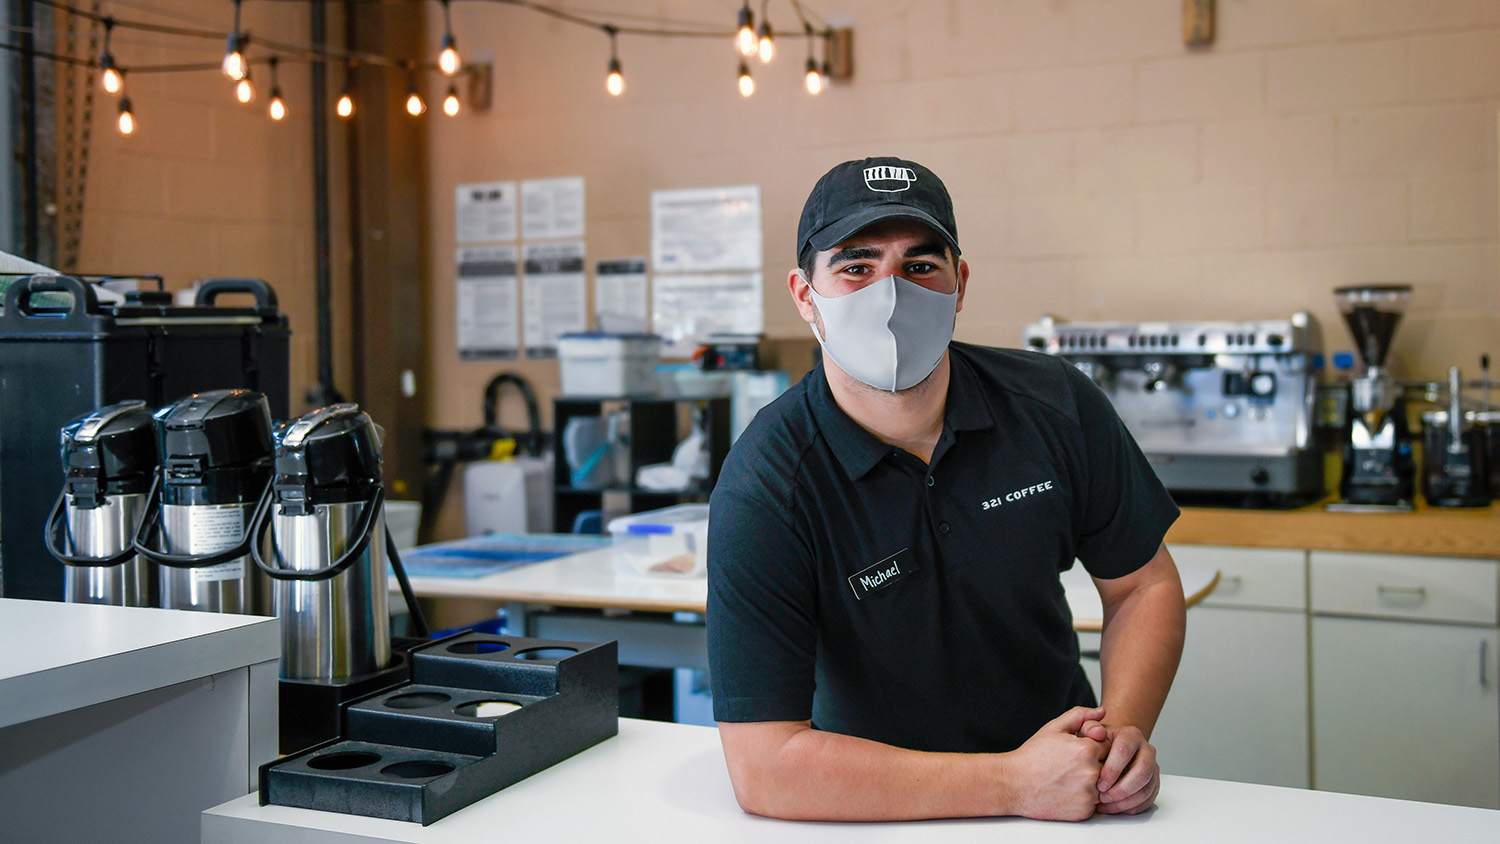 Michael Evans stands behind the counter of 321 Coffee for a portrait.